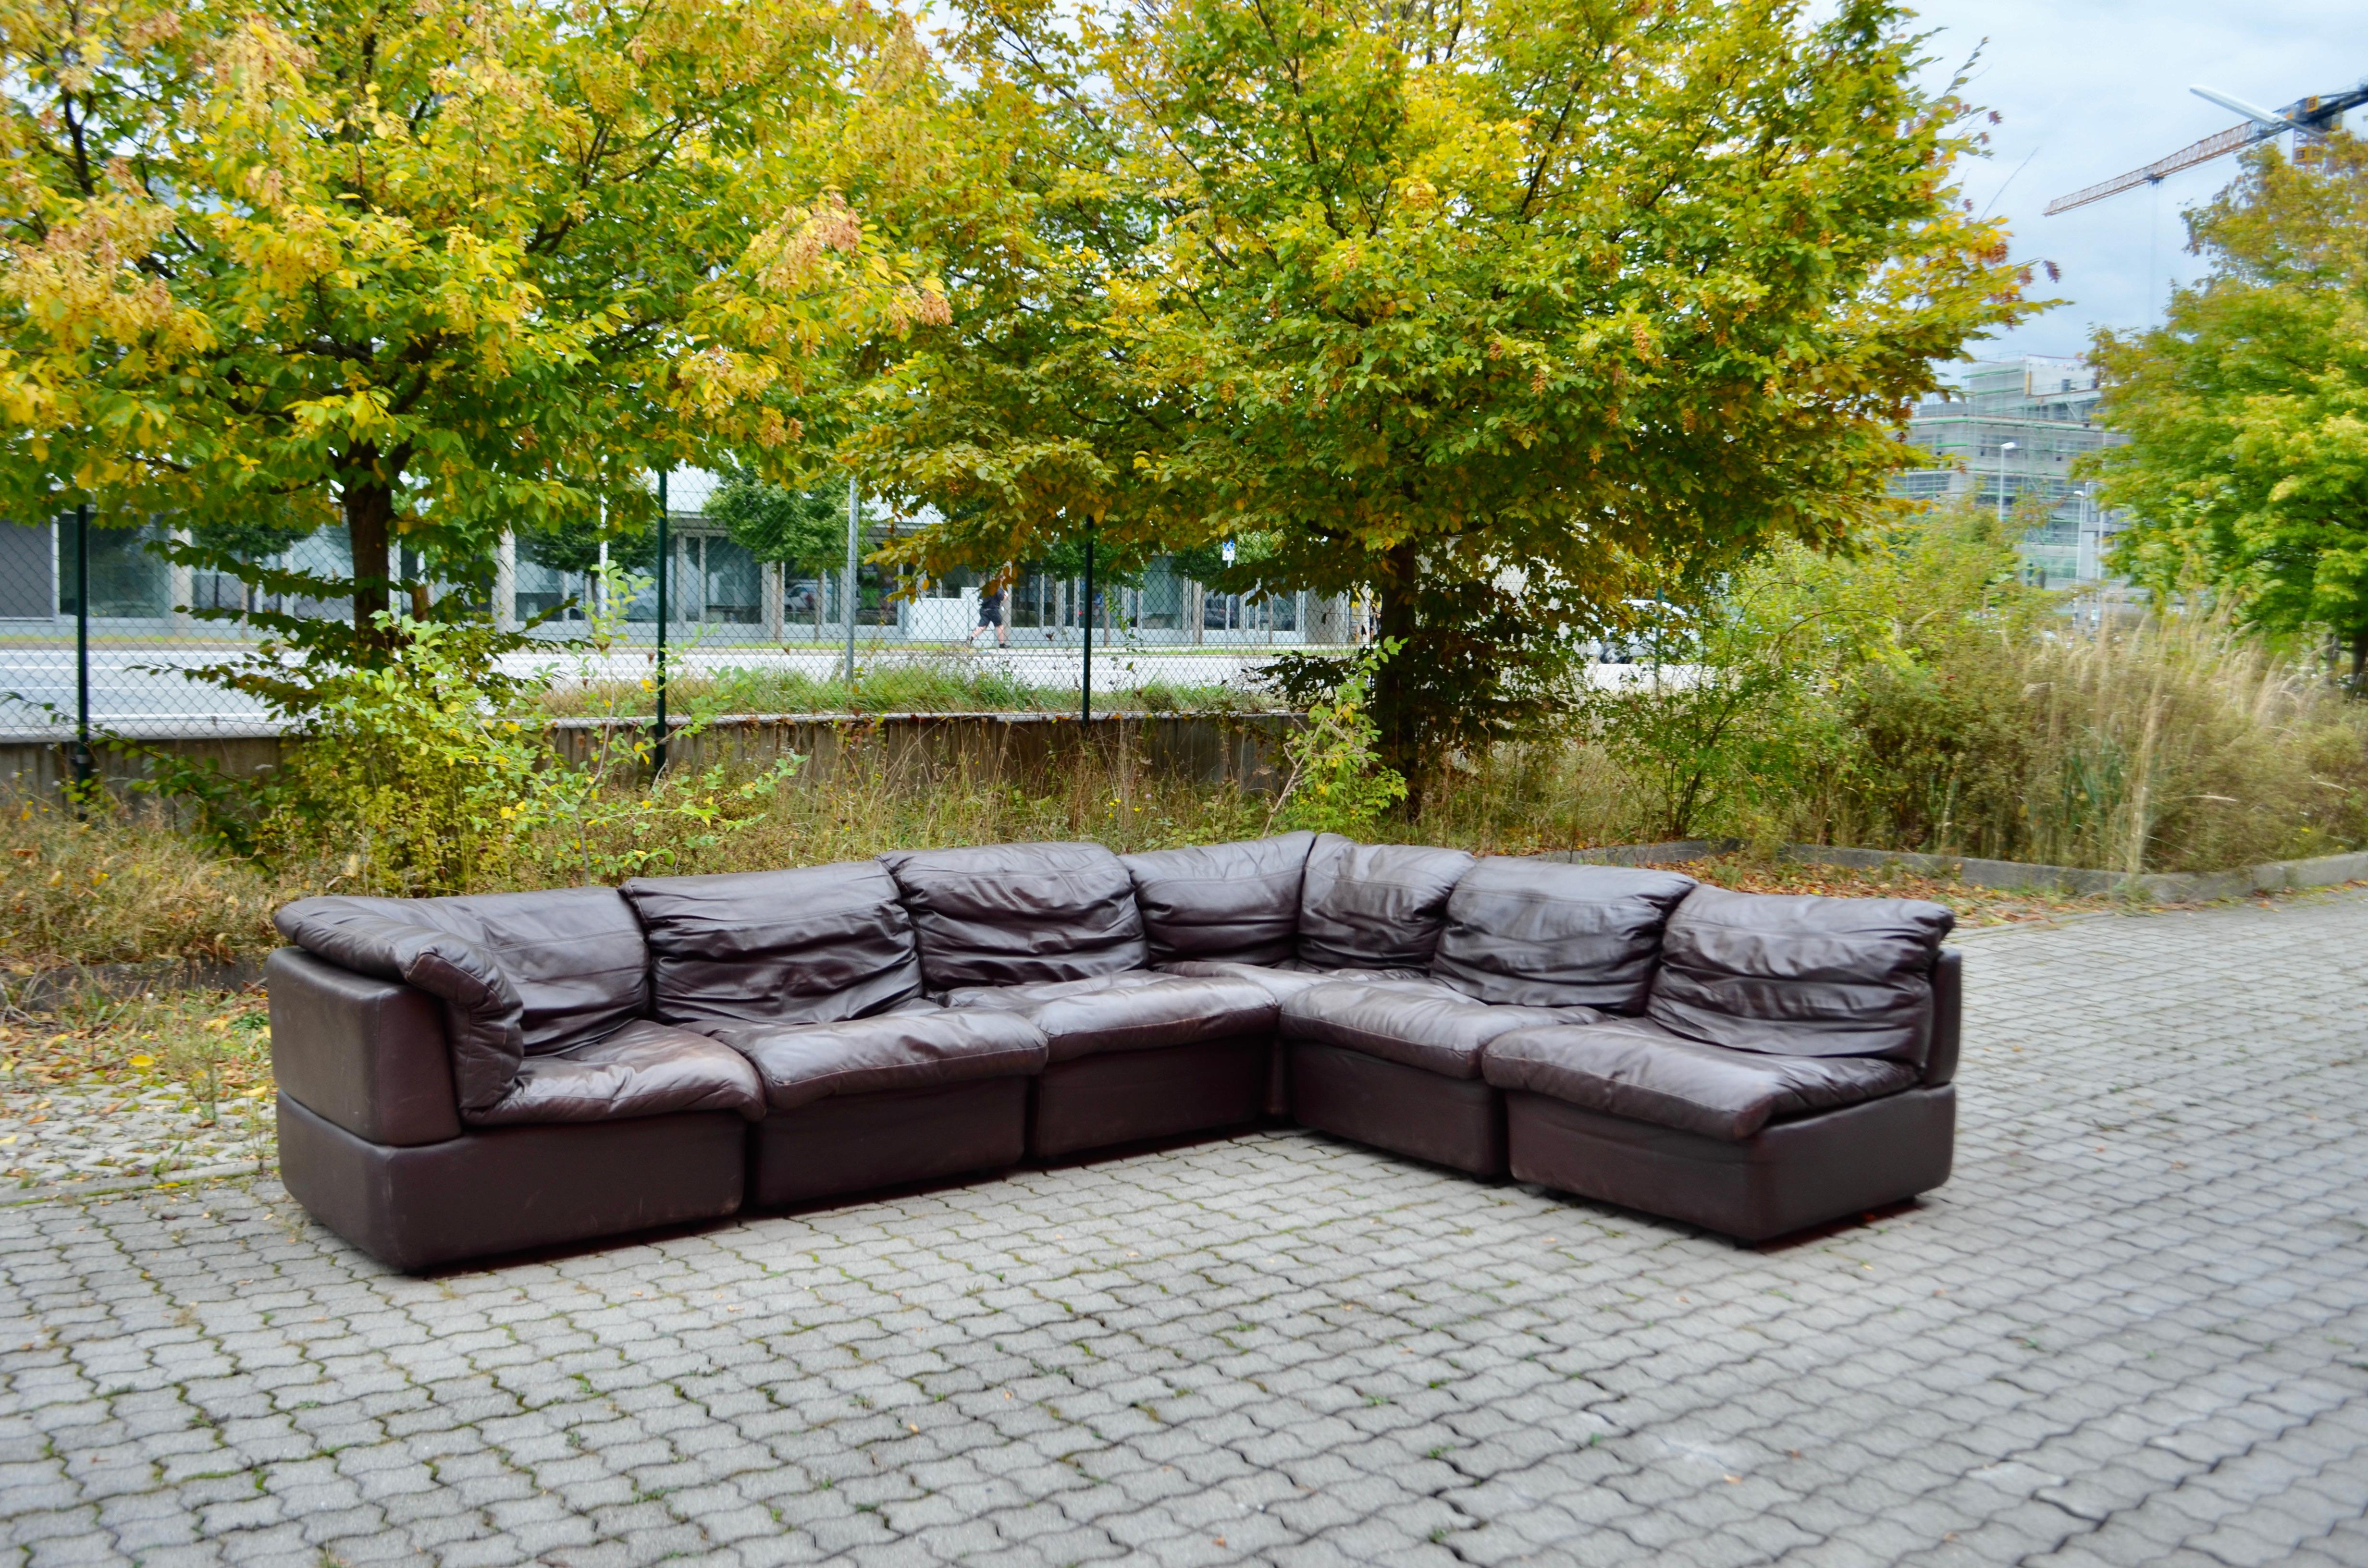 This stunning Modular sectional leather sofa was by Rolf Benz manufactured in Germany.
It is a pure 70ties design with timeless modern shape.
The leather is a aniline brown color with a soft leather touch.
The frame of every element is made of